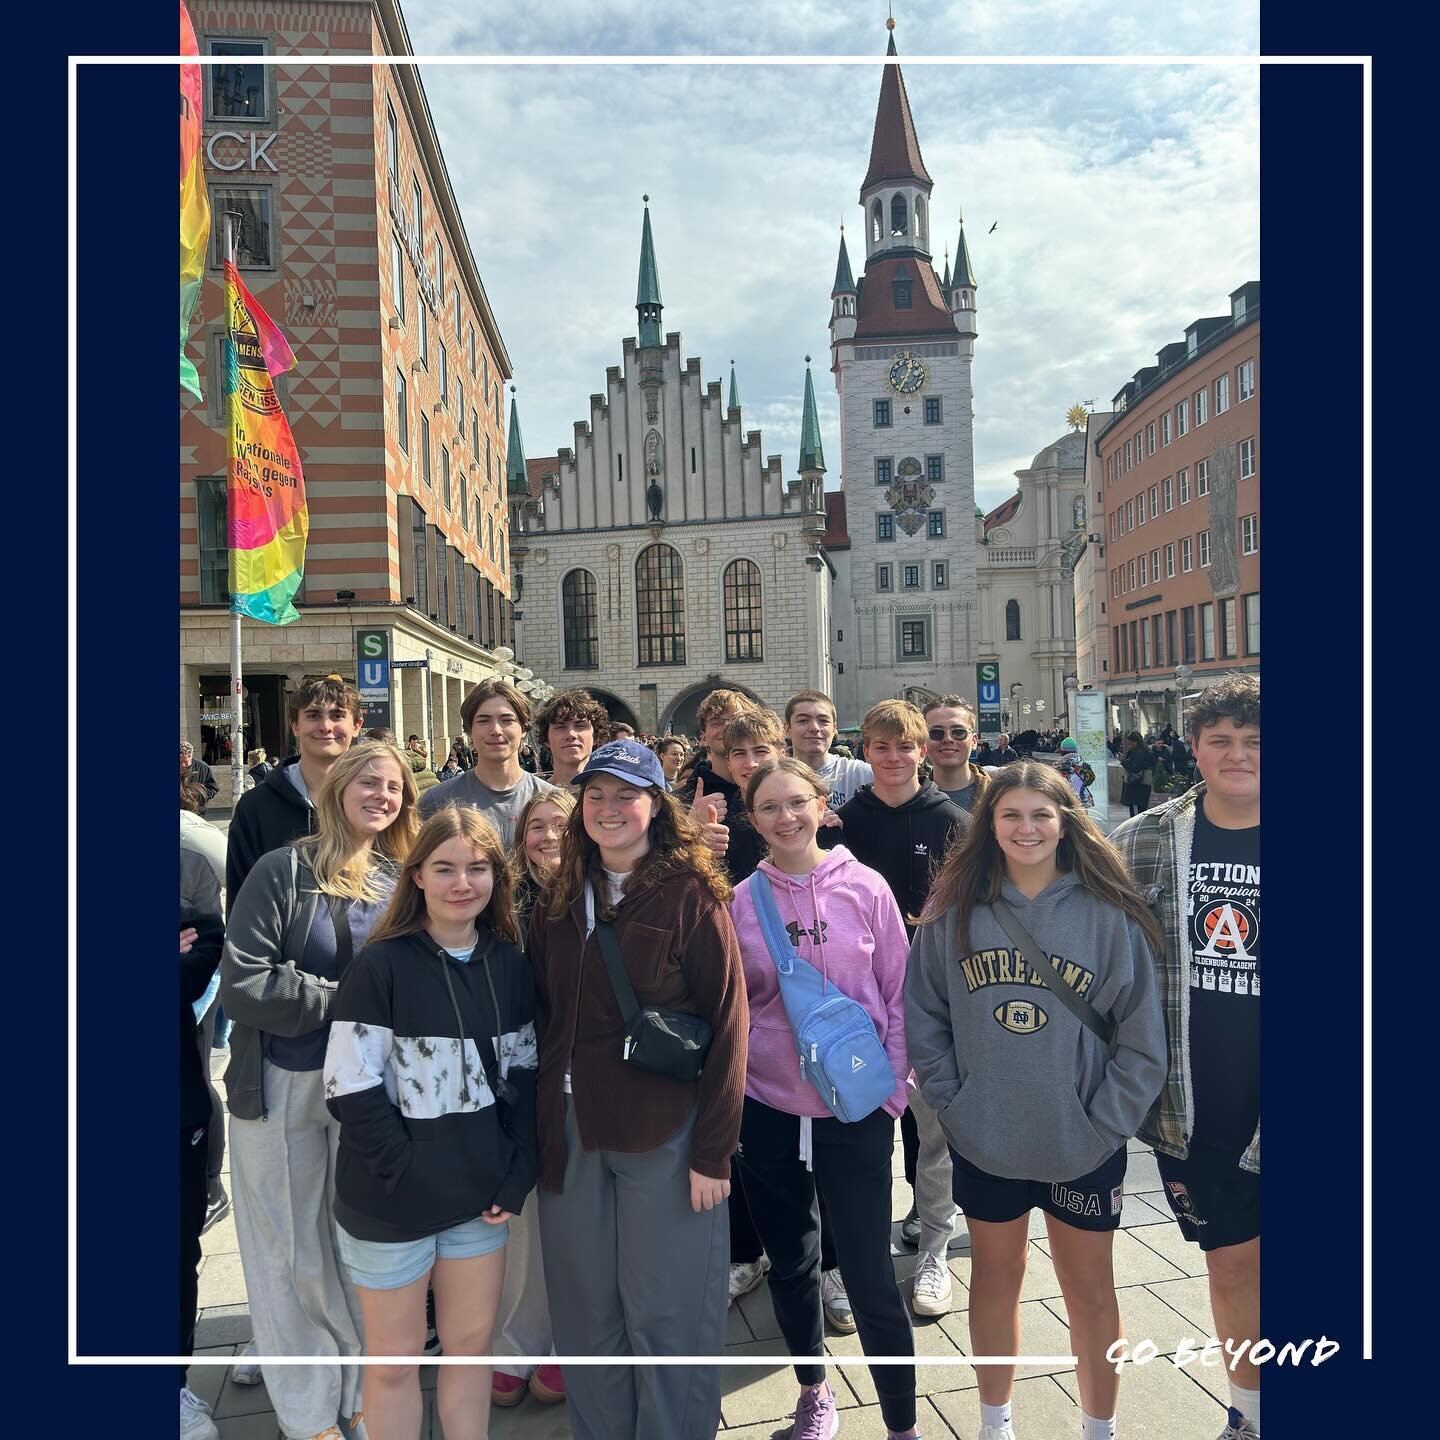 23 Oldenburg Academy students spent their spring break on an excursion in Europe. They visited Germany, Austria, Lichtenstein and Switzerland. Numerous excursions and tours were set up to learn about the history of the different countries. Mr. Hartma